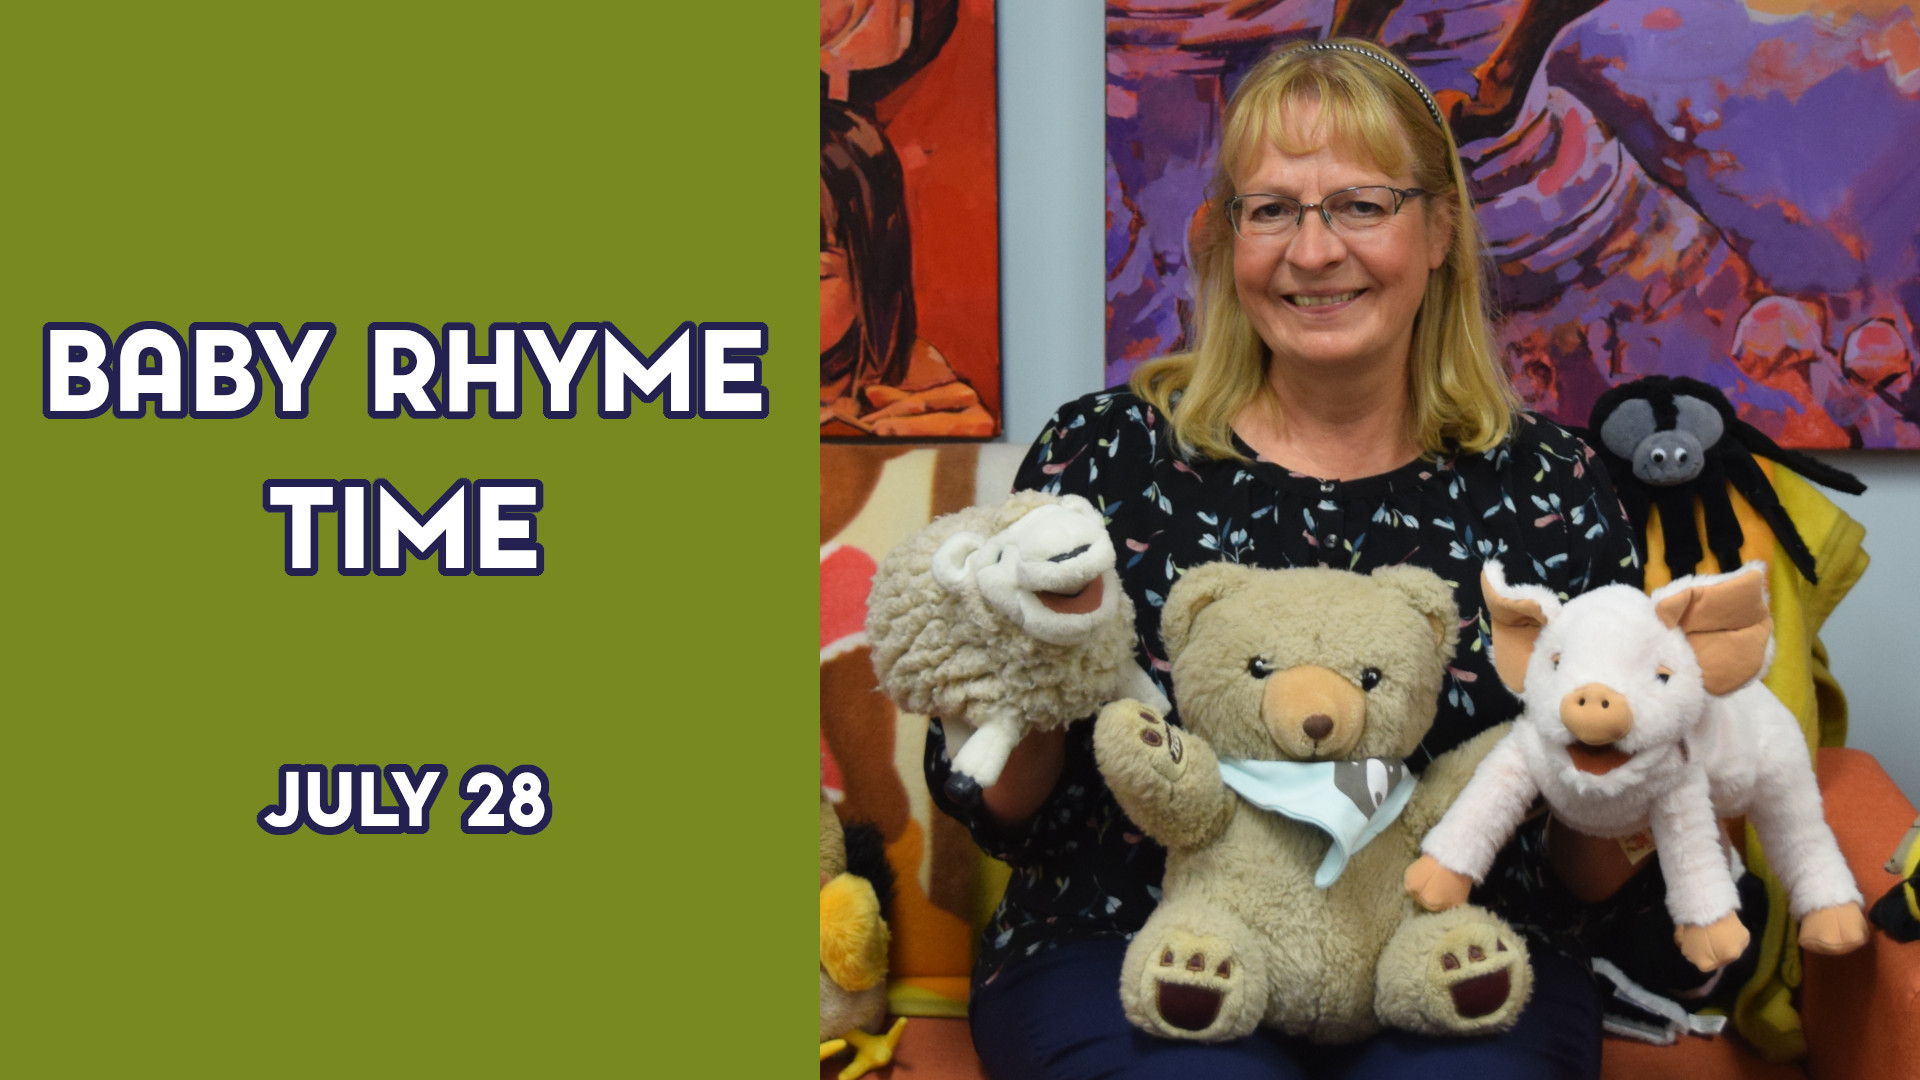 A woman holds stuffed animals next to the text "Baby Rhyme Time July 28"